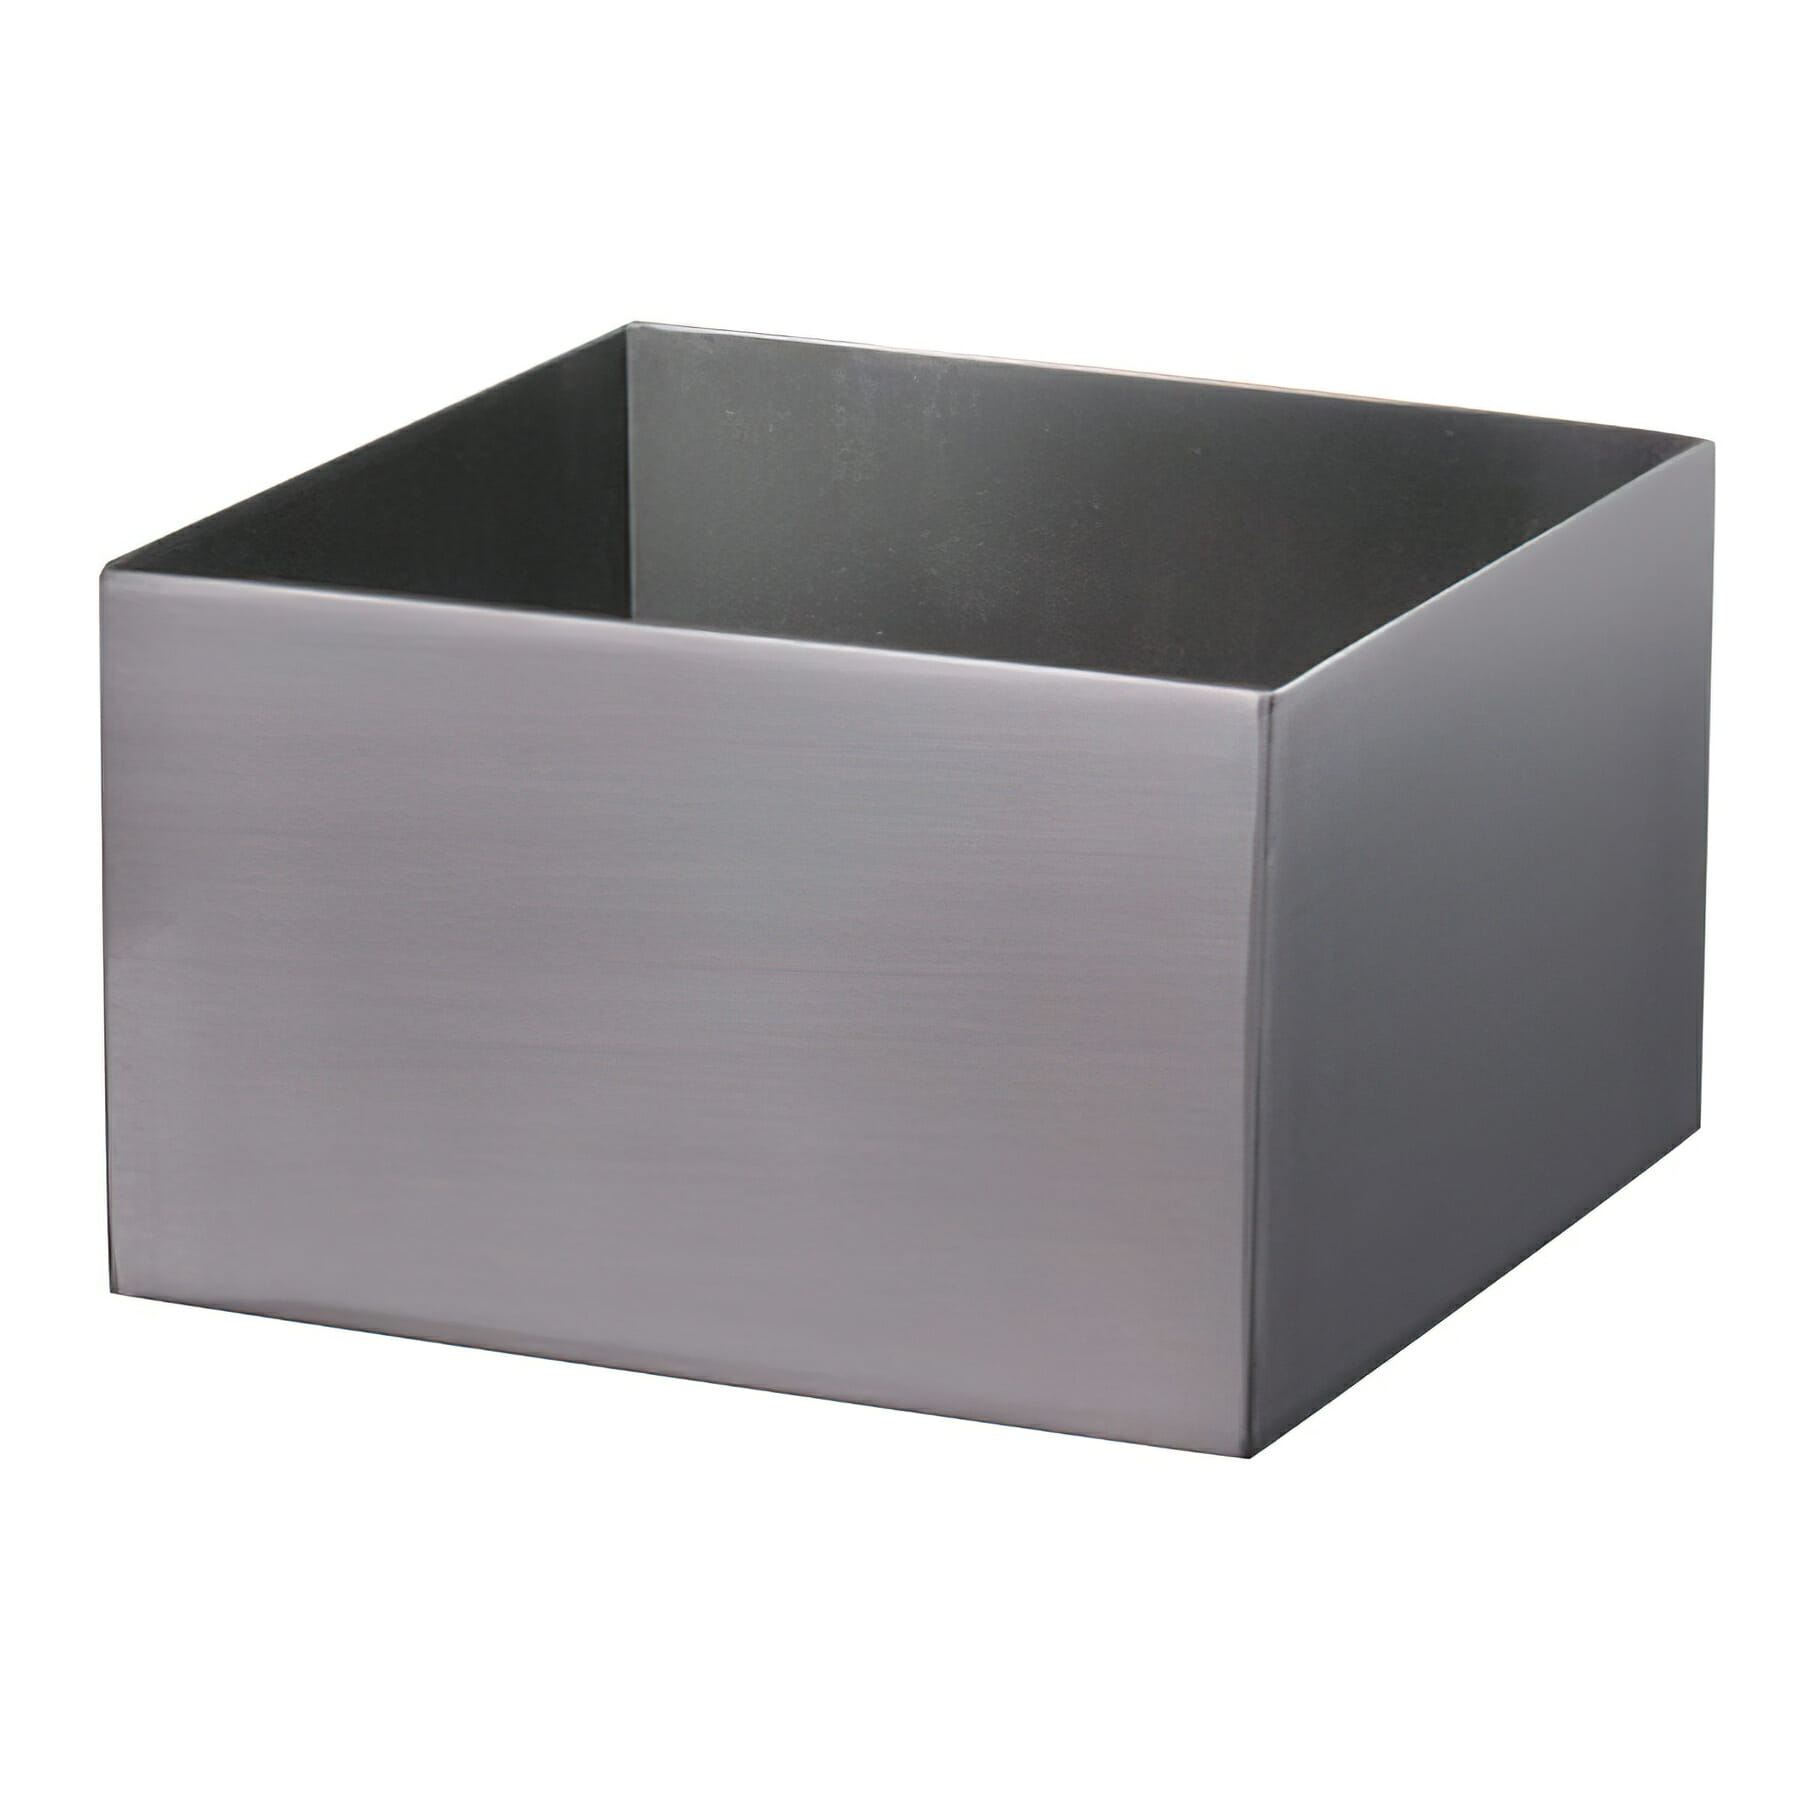 5" Stainless Steel Square Pan w/ Brushed Finish, 3" tall